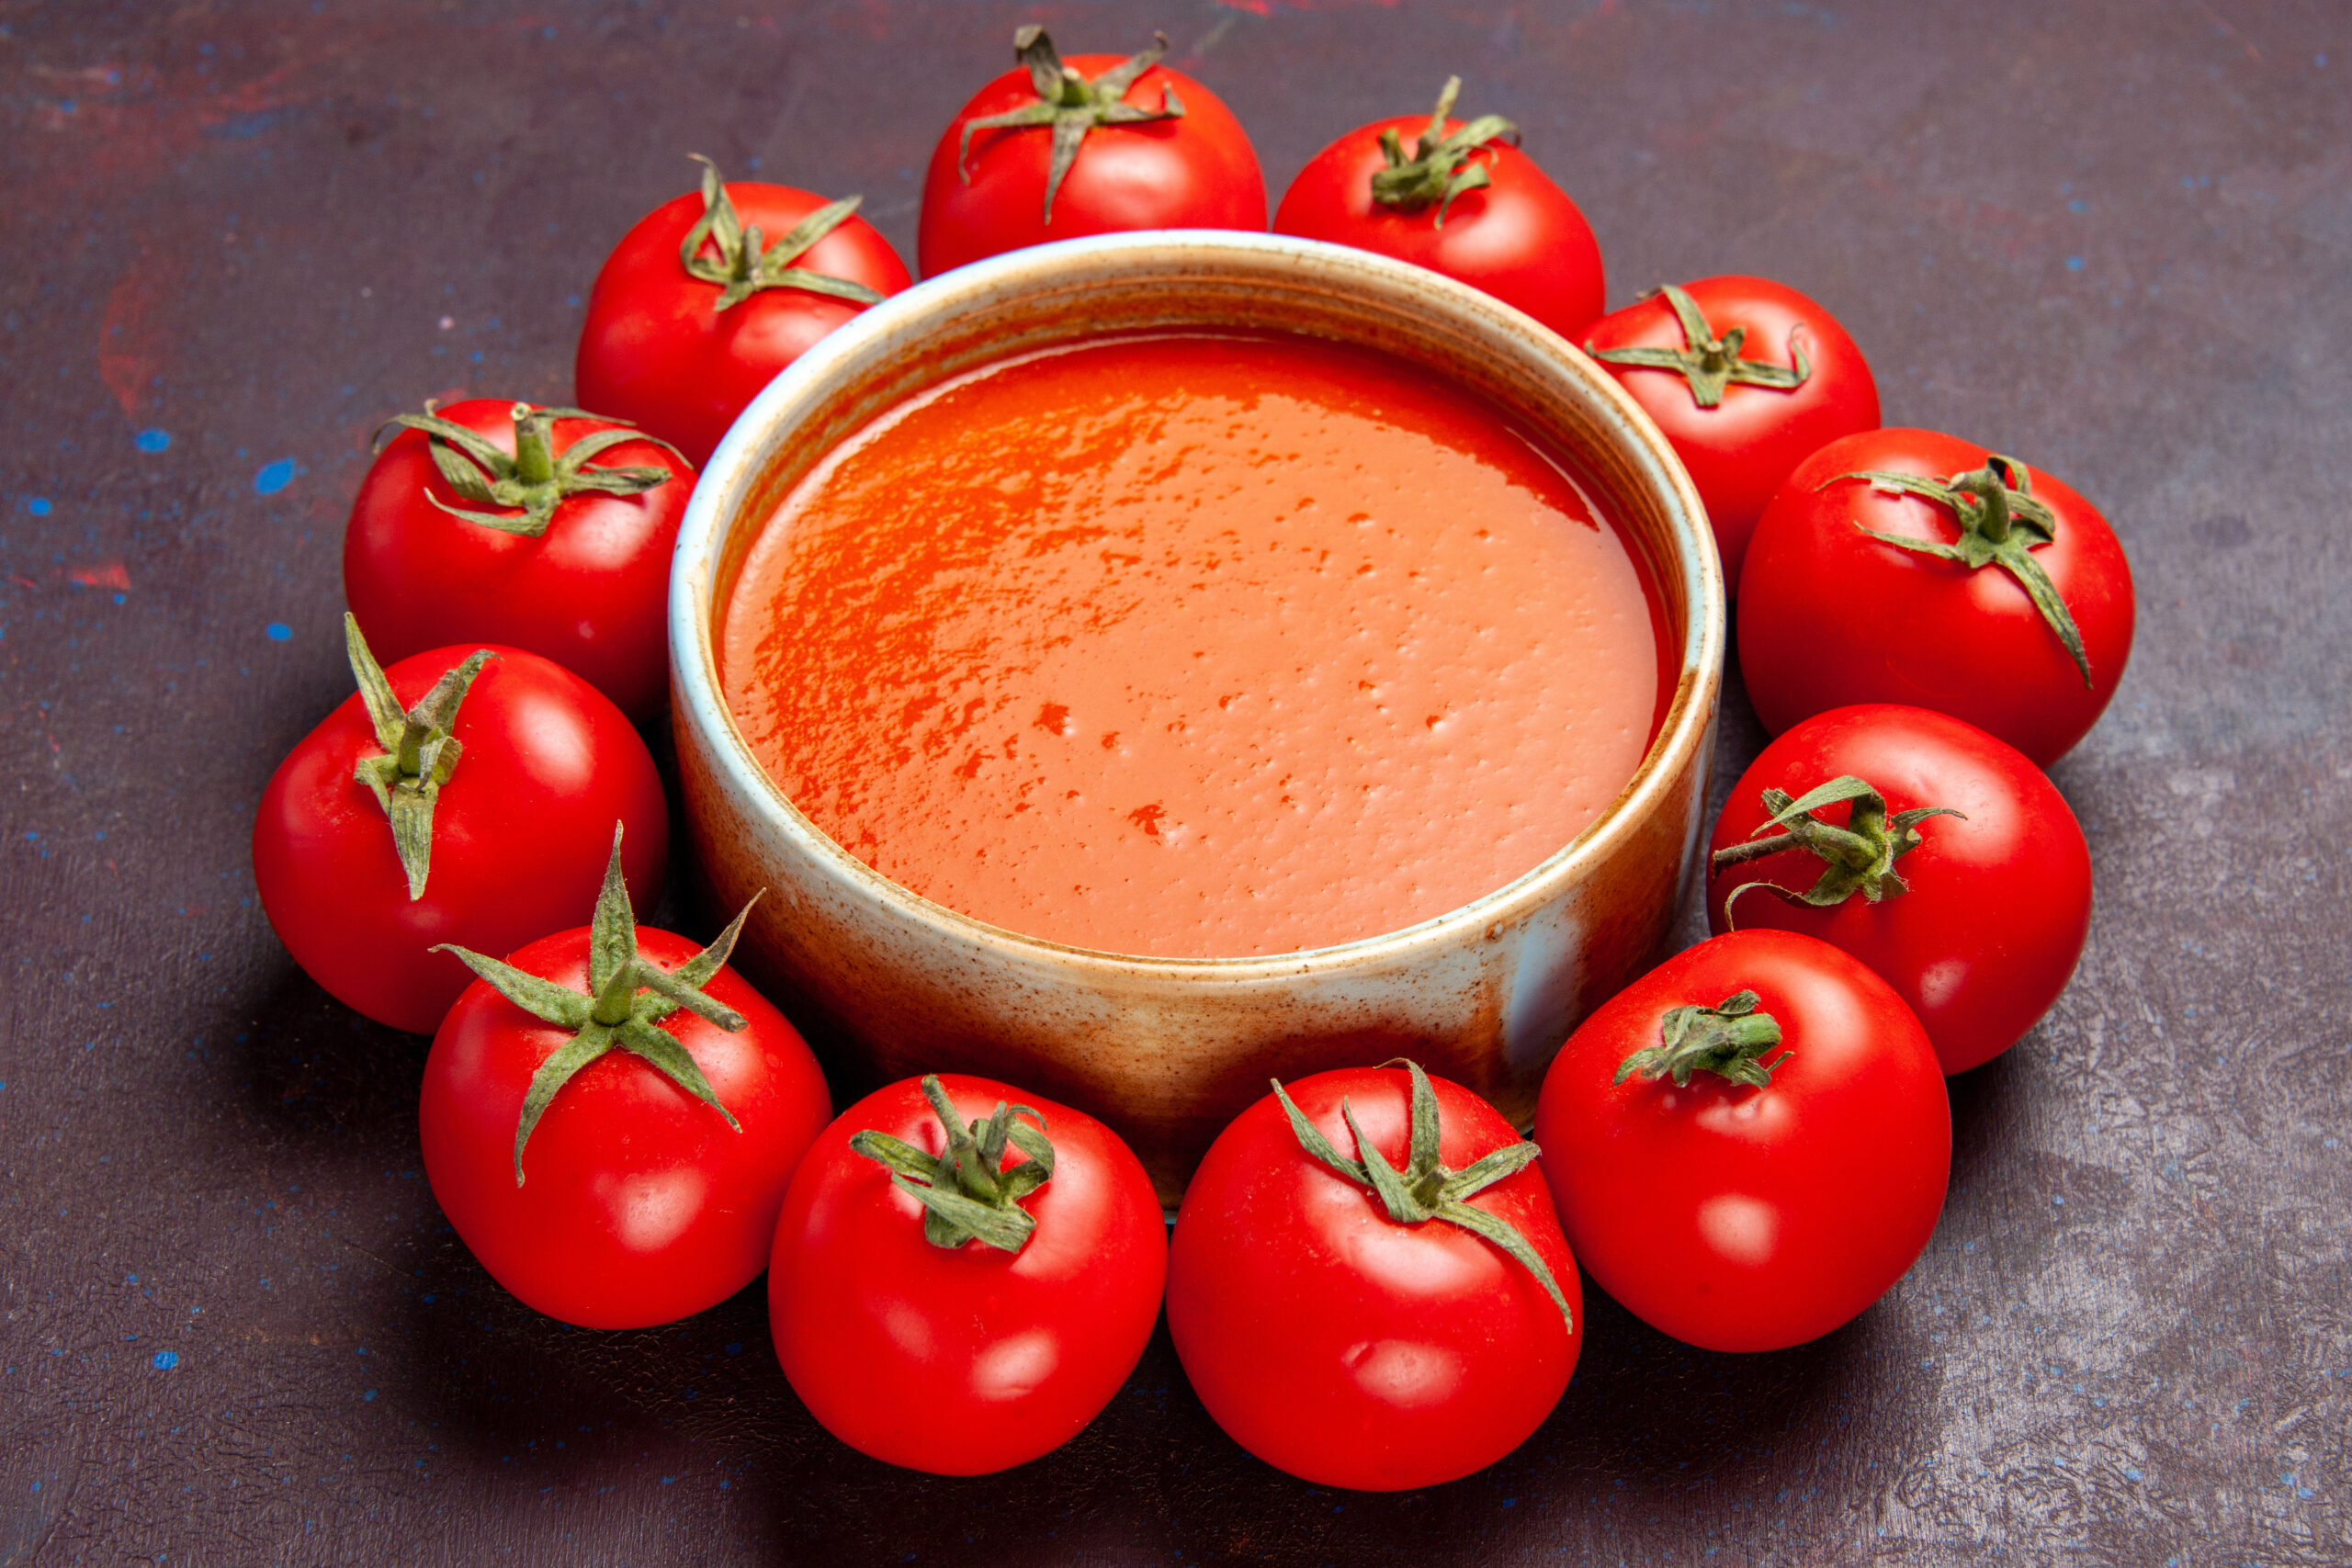 How to Substitute Tomato Soup for Tomato Sauce